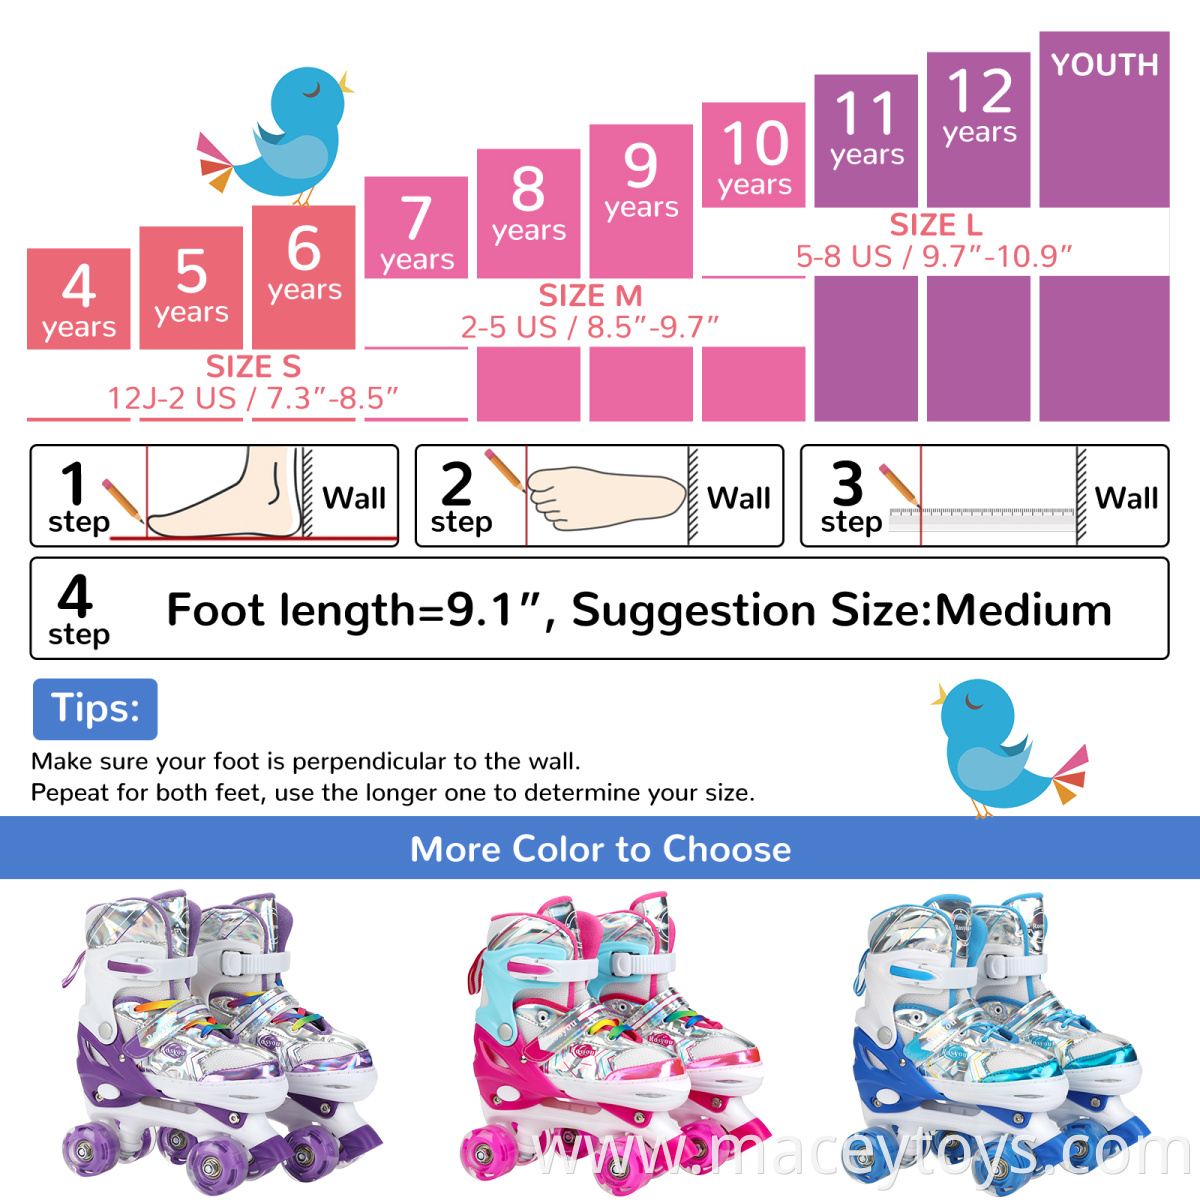 3-color high quality Outdoor playing Hot seller Sports Kids Roller Skate Shoes Free accessories